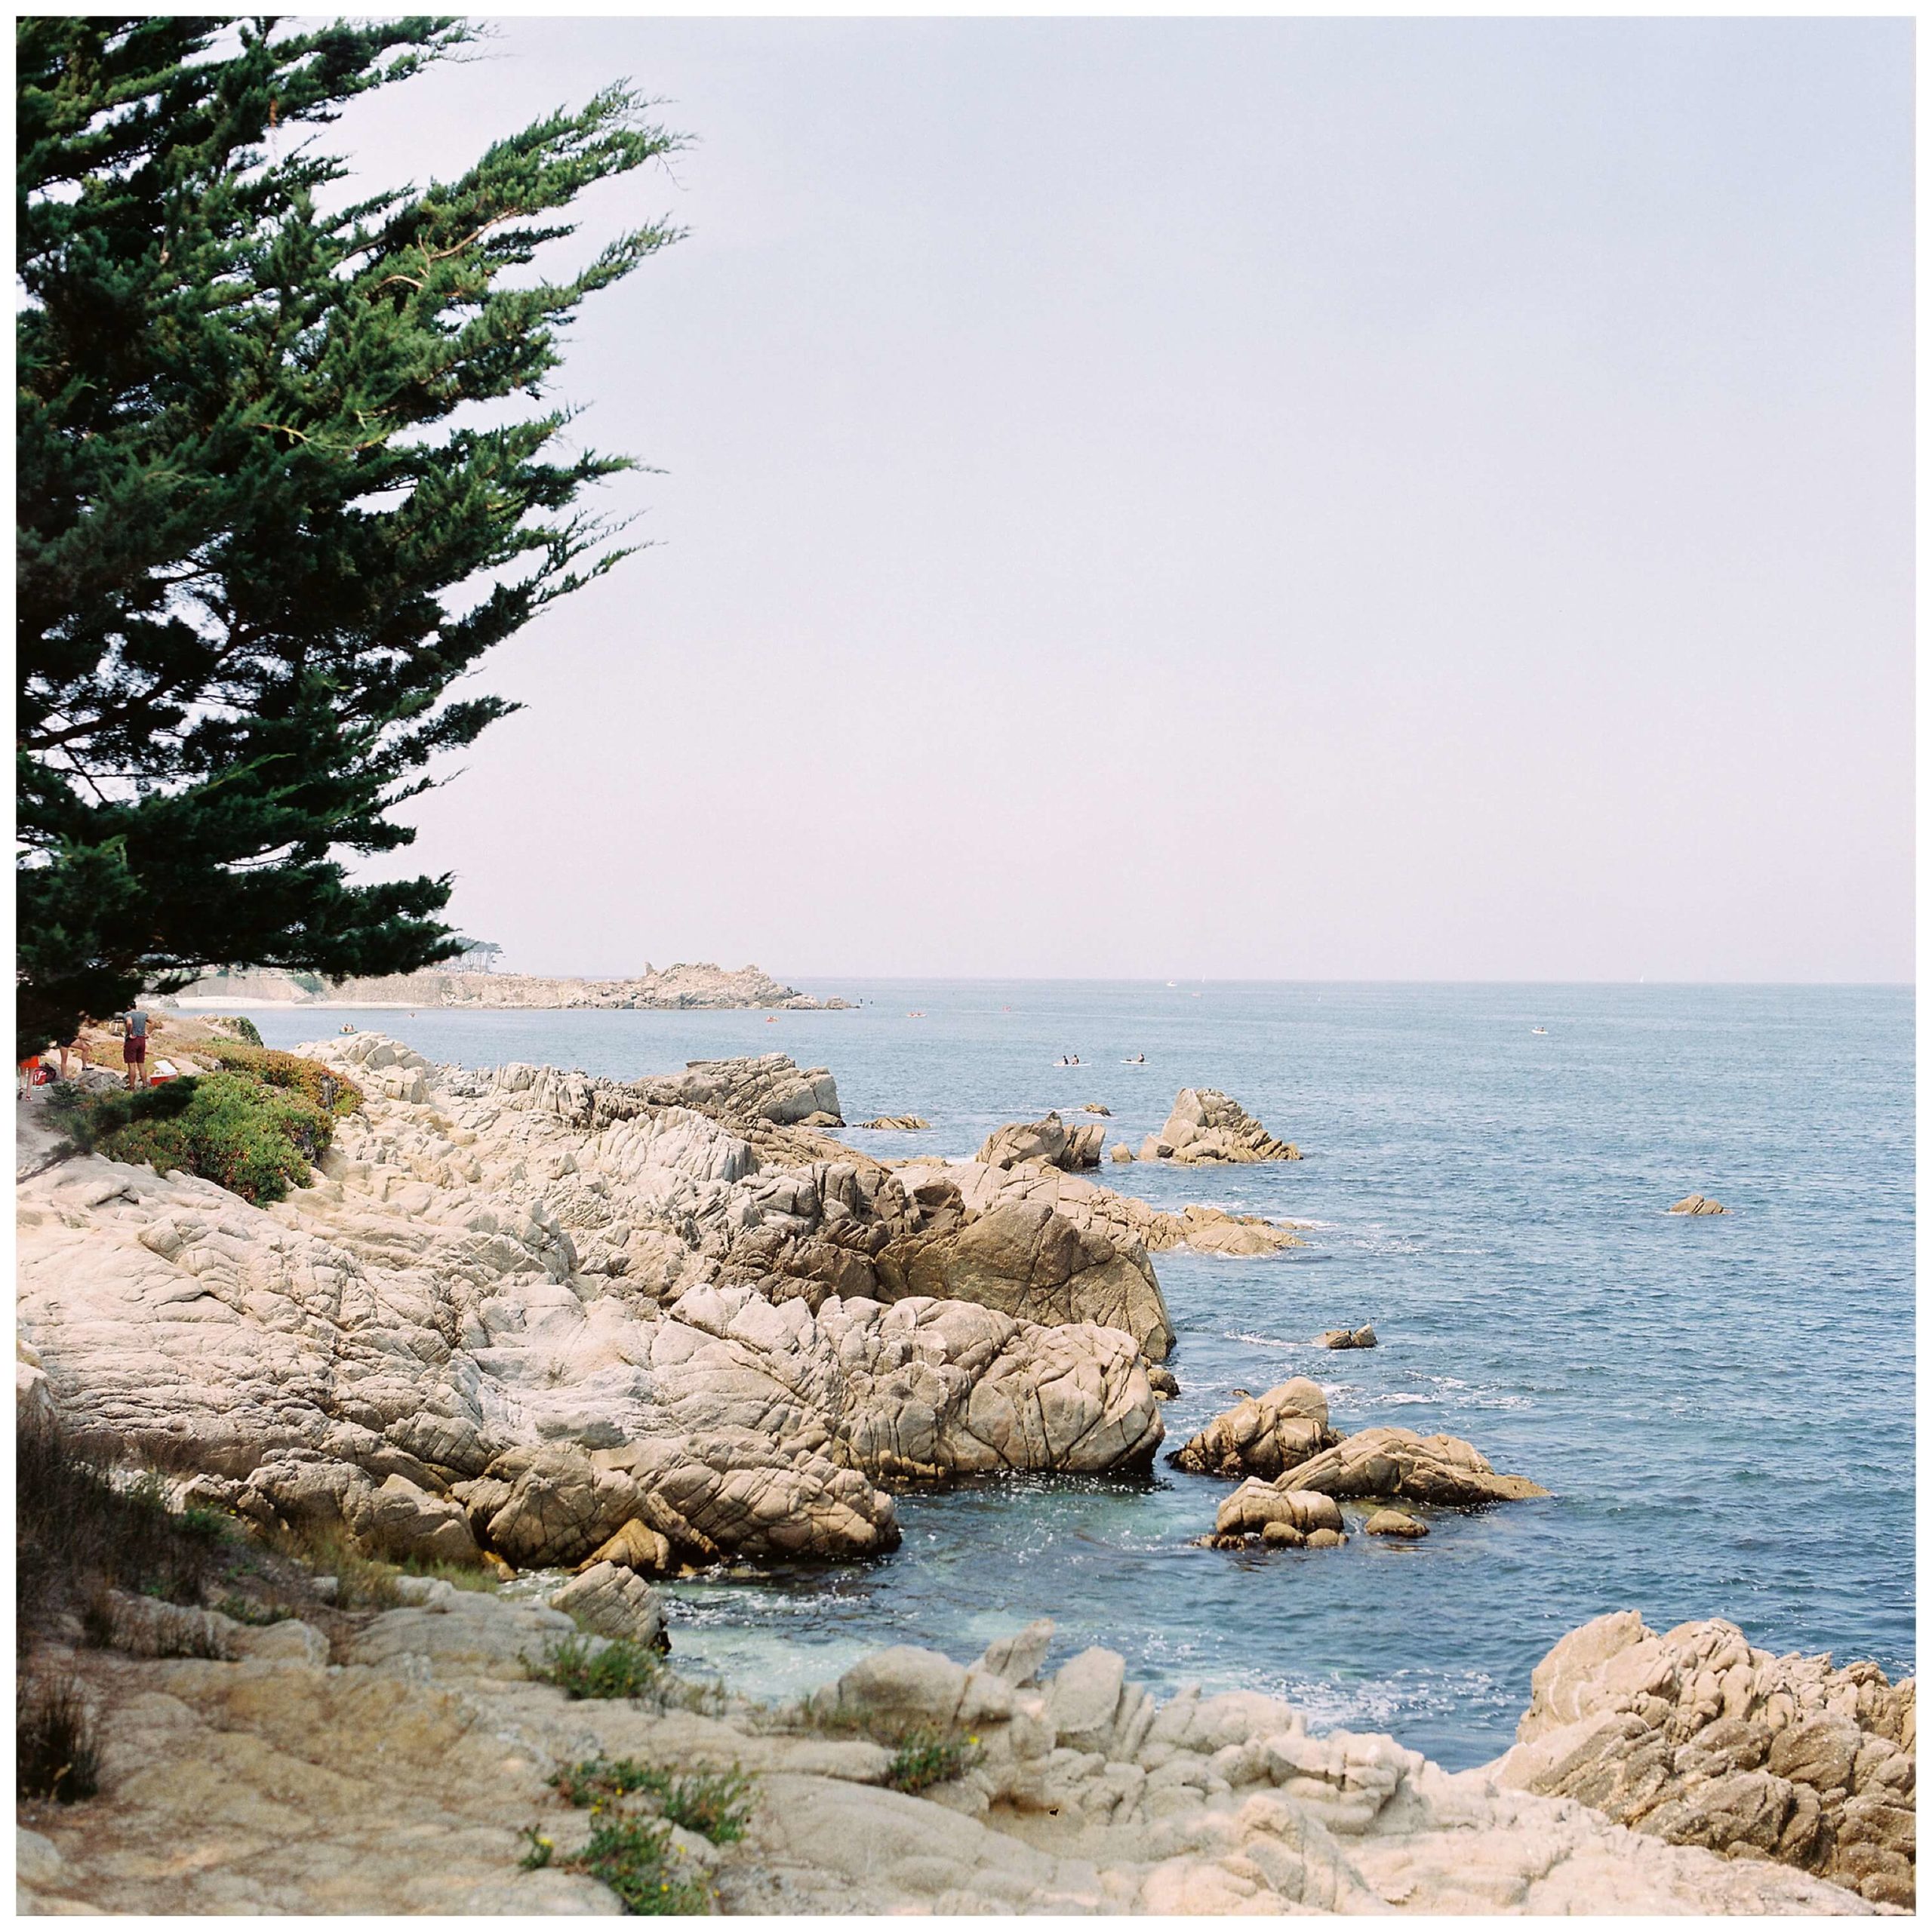 A cypress tree shades the foreground of an image of the coastline in Monterey near Lover's Point.